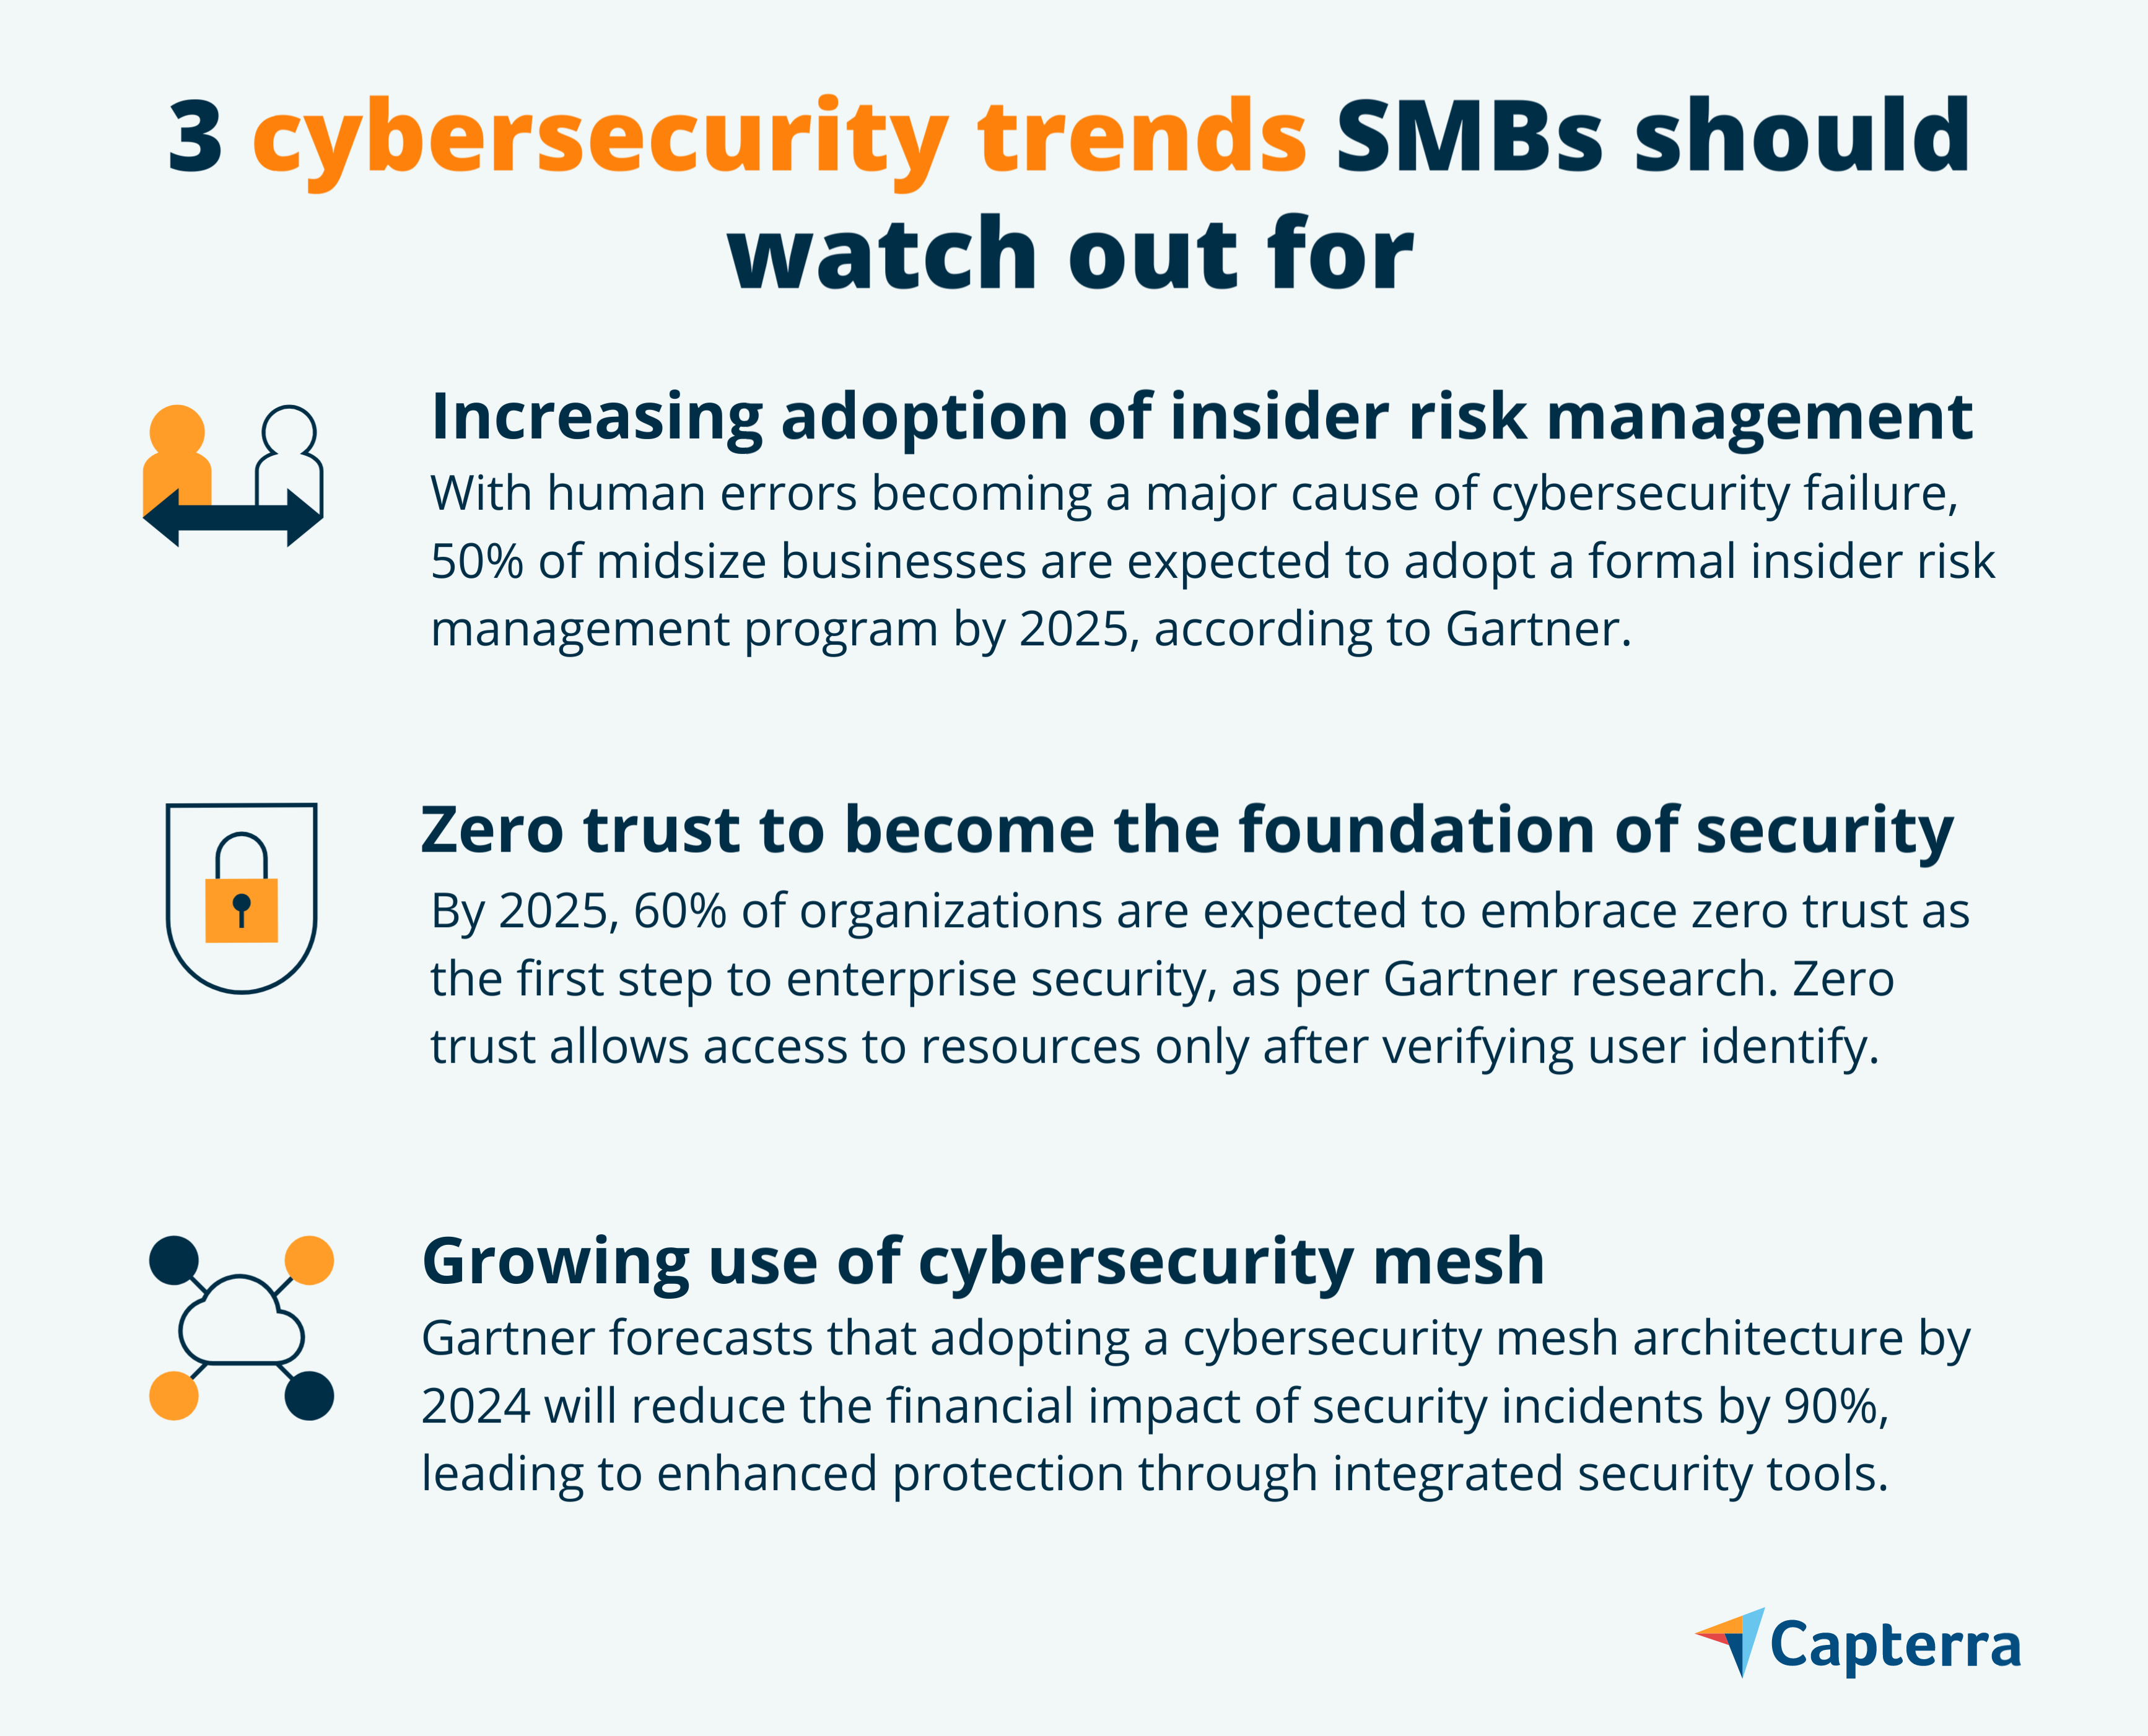 graphic showing 3 cybersecurity trends to watch for the blog article "Future of Cybersecurity: 3 Trends SMBs Should Watch Out For"